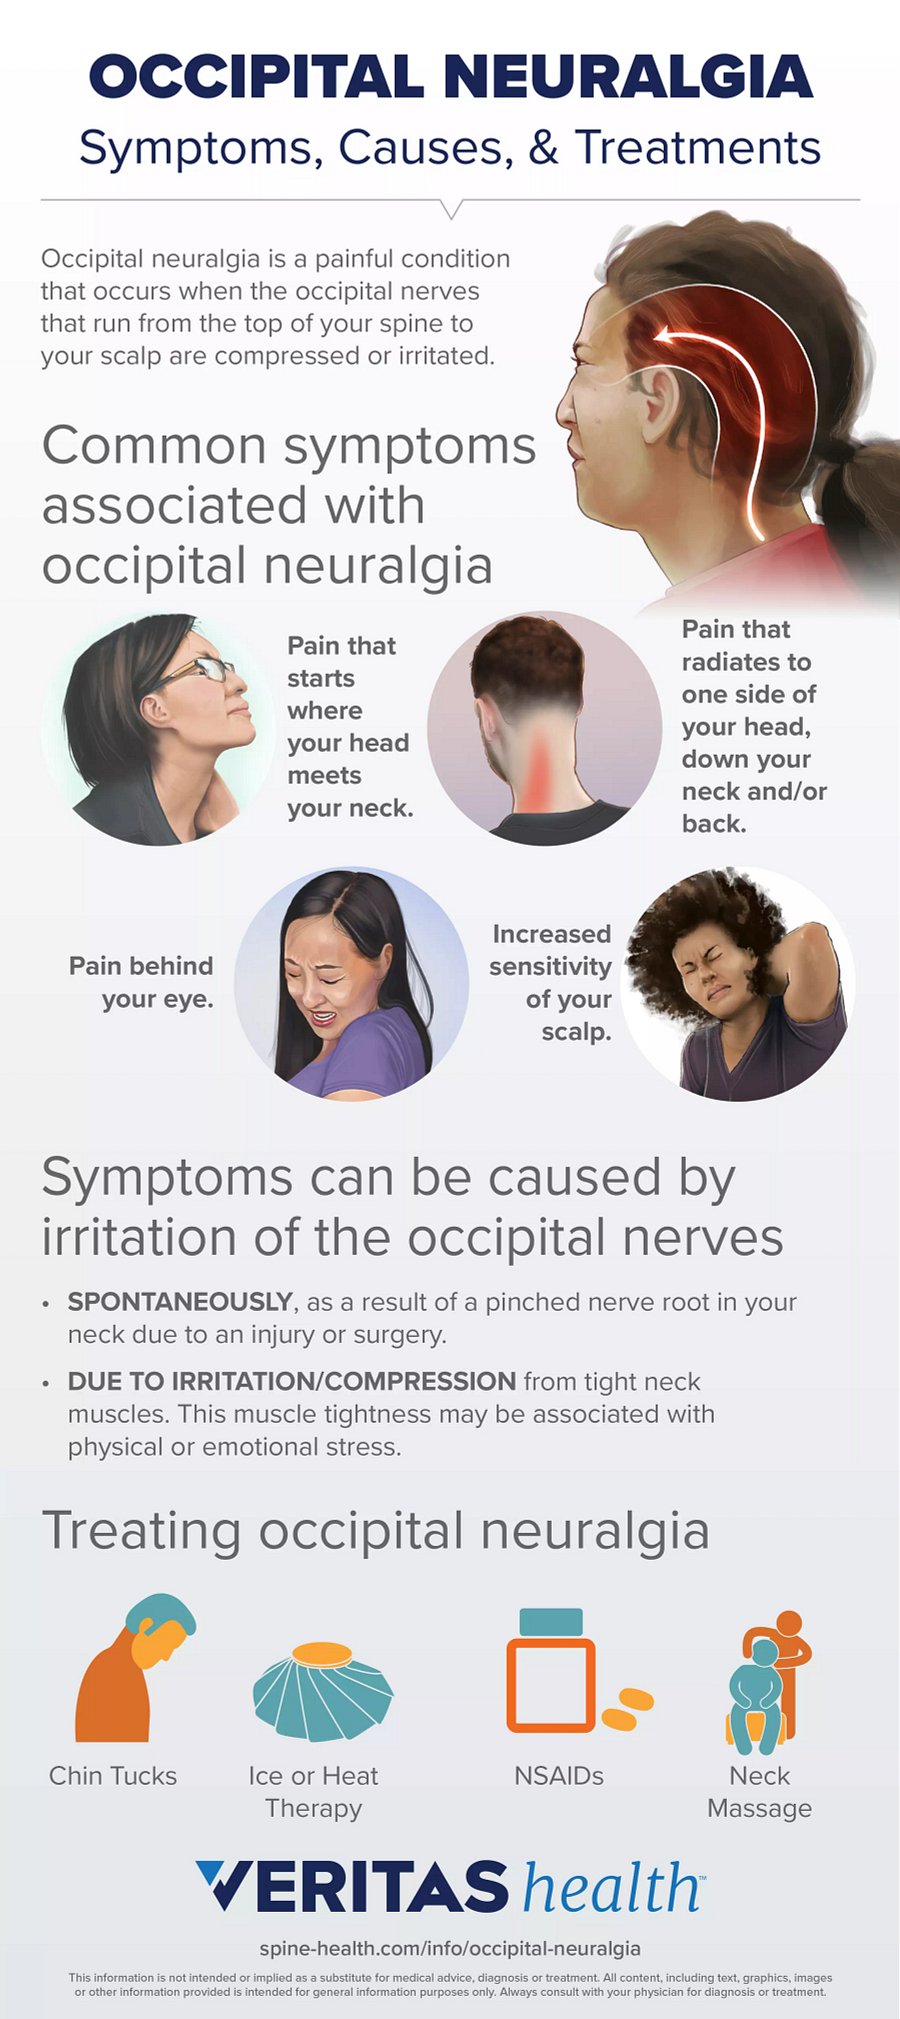 Occipital Neuralgia: What It Is and How to Treat It | Spine-health